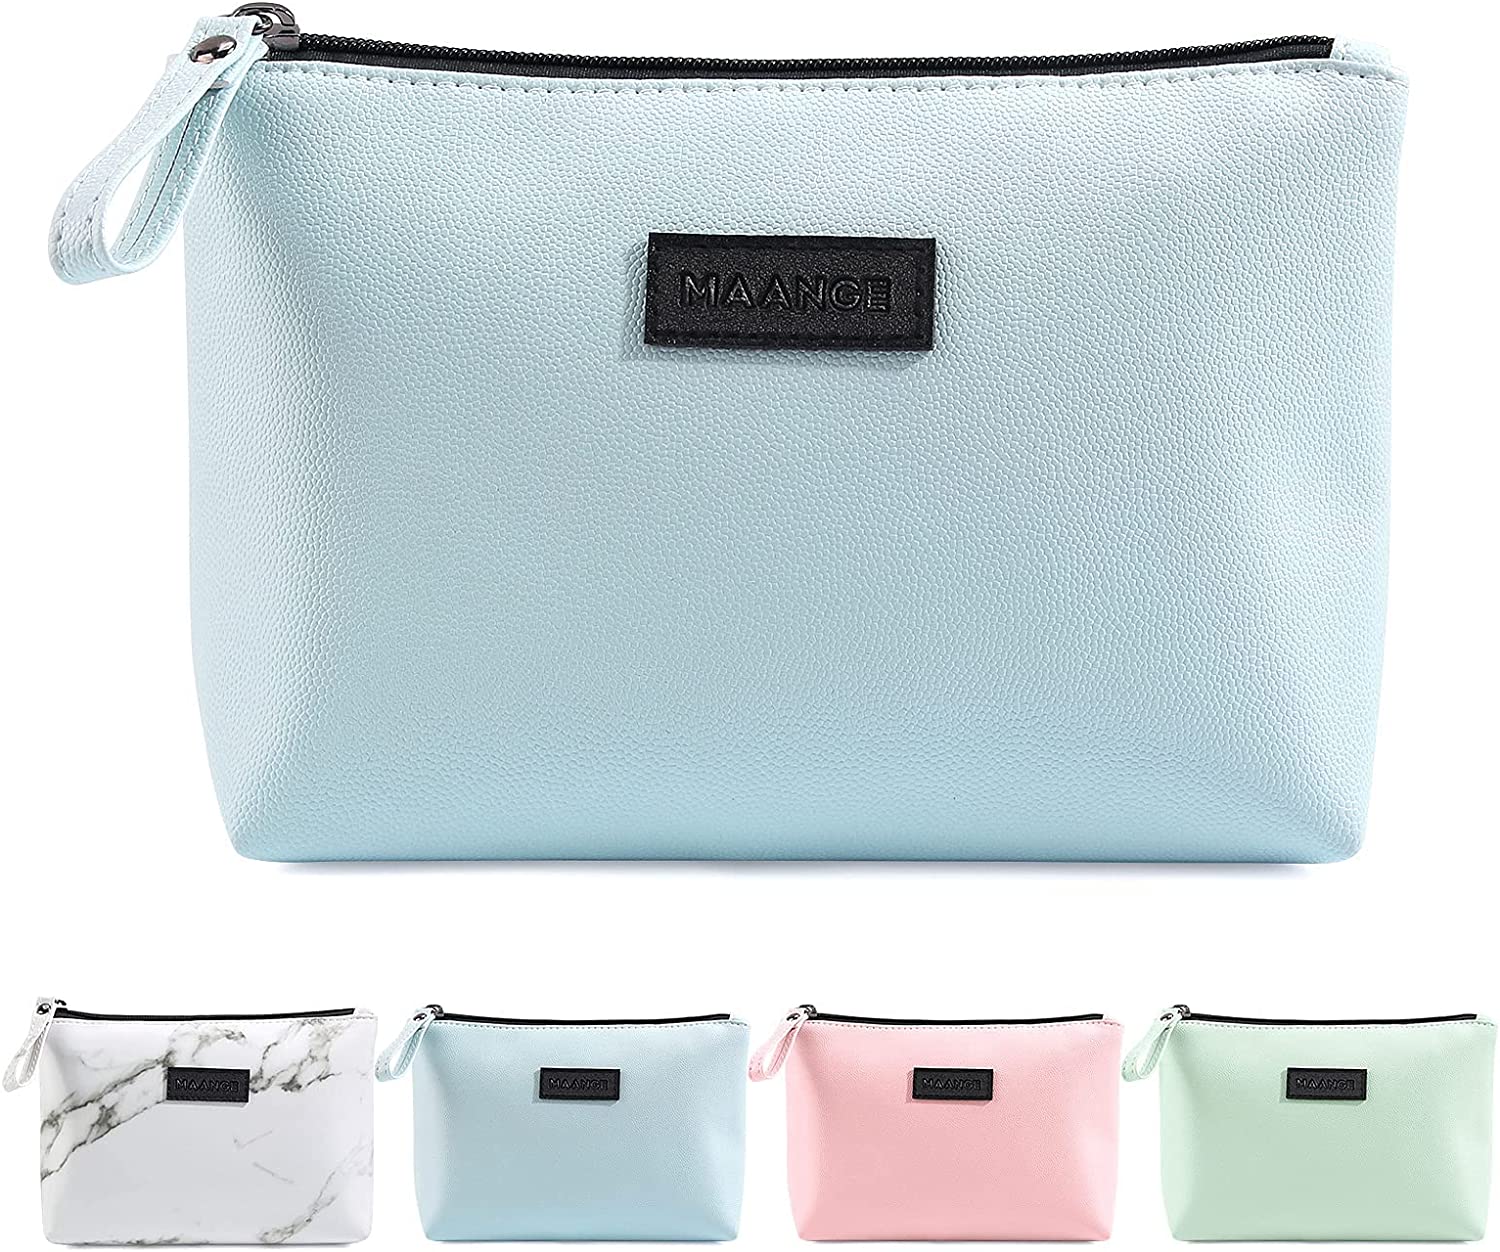 Cosmetic Bag For Purse WholeSale - Price List, Bulk Buy at